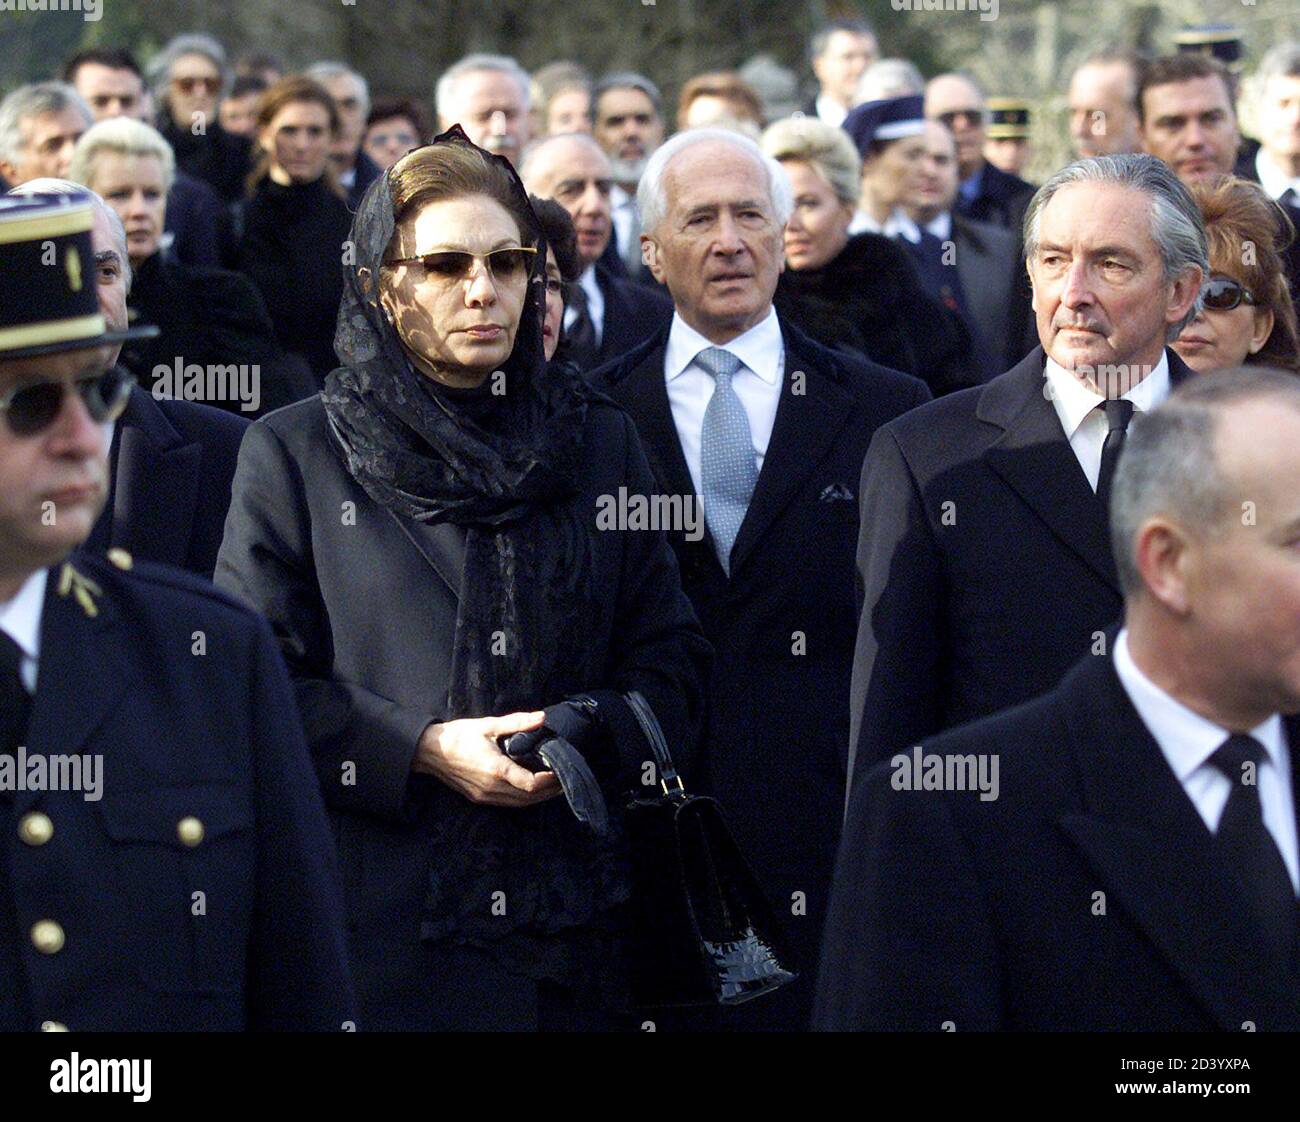 Iran's Empress Farah Diba (C Left) arrives with guests for the funeral service for Italy's last Queen Maria Jose at the Hautecombe Abbey, February 2, 2001. Maria Jose was Italy's last queen, who with her husband Umberto II ruled for only 27 days before a referendum introduced the Italian republic on June 2, 1946. Maria Jose was born in 1906 at Ostend, Princess Maria Jose Charlotte Henrietta Gabriella of Saxony-Coburg, the daughter of King Albert and Queen Elizabeth of the Belgians.  RP/JES/CRB Stock Photo